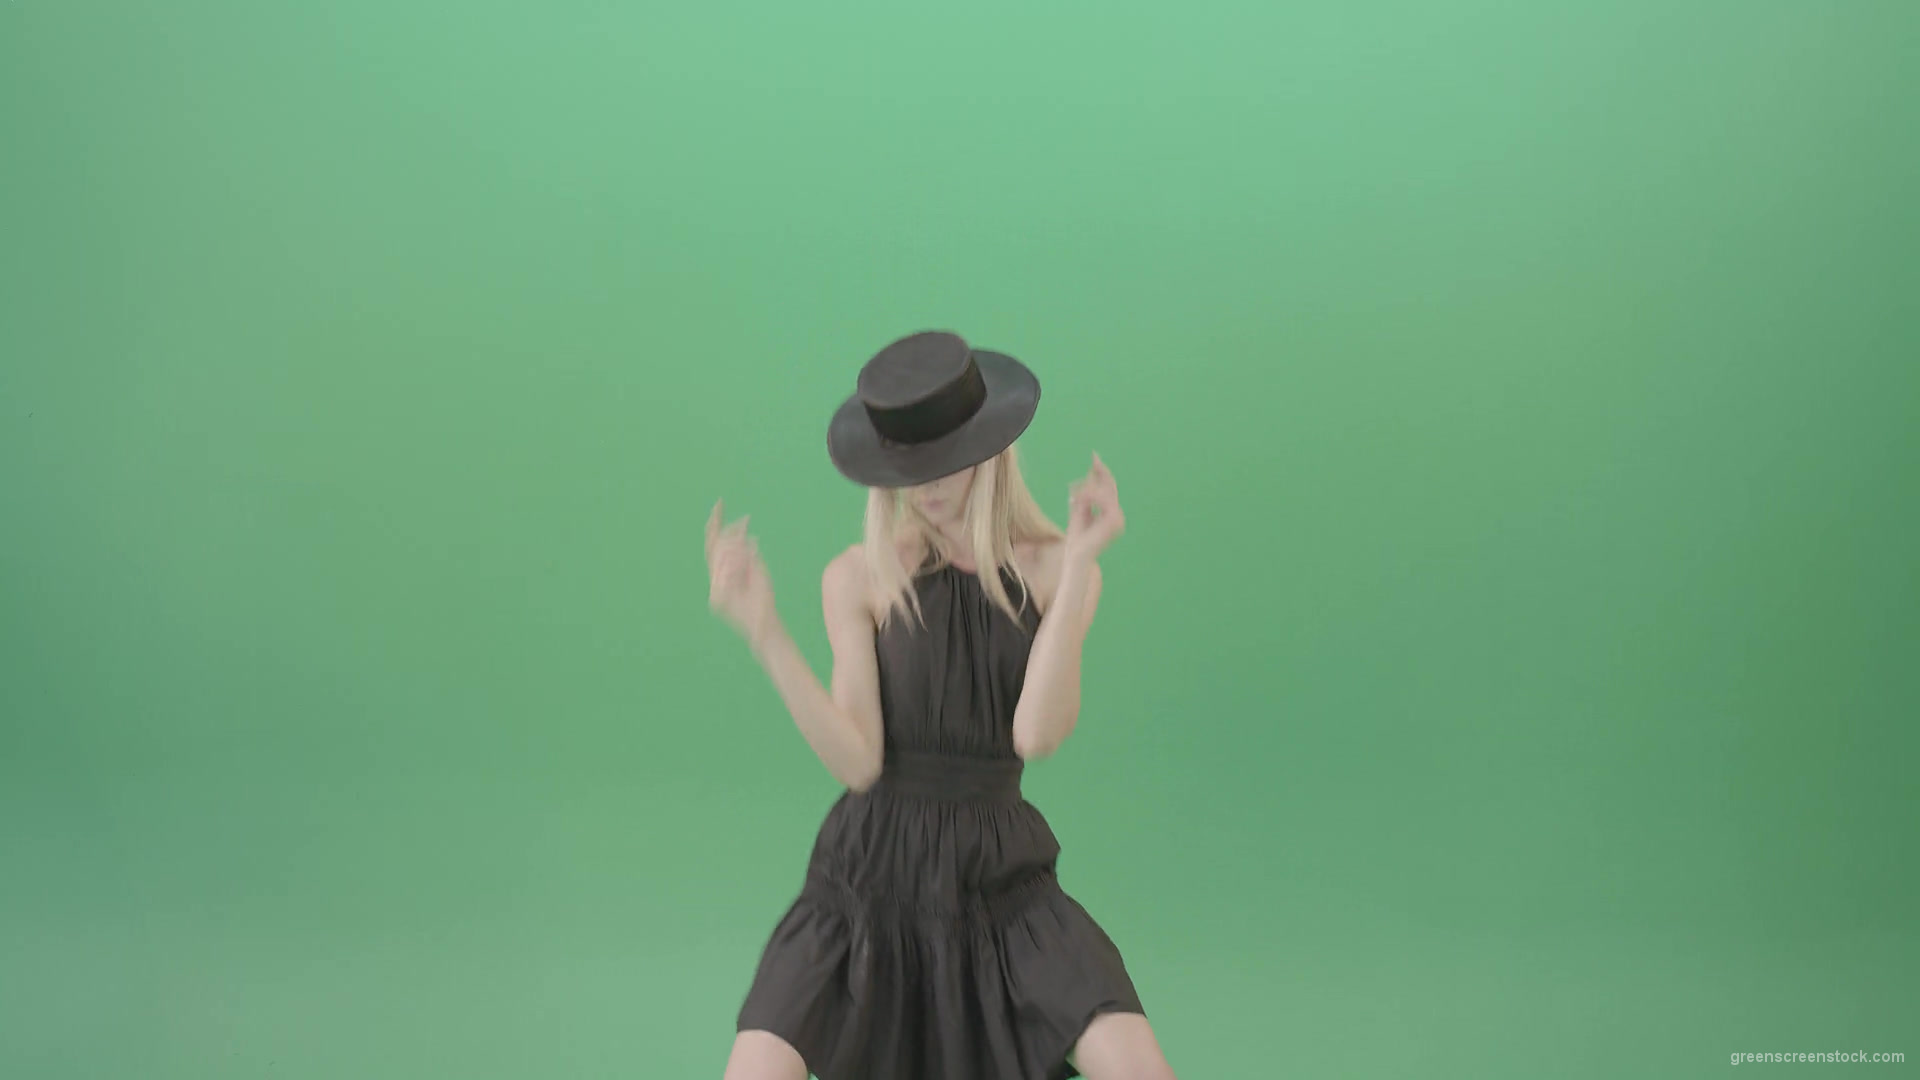 Video-Art-Fashion-Dance-by-Girl-in-black-outlet-and-dark-hat-on-green-screen-Video-Footage-1920_009 Green Screen Stock